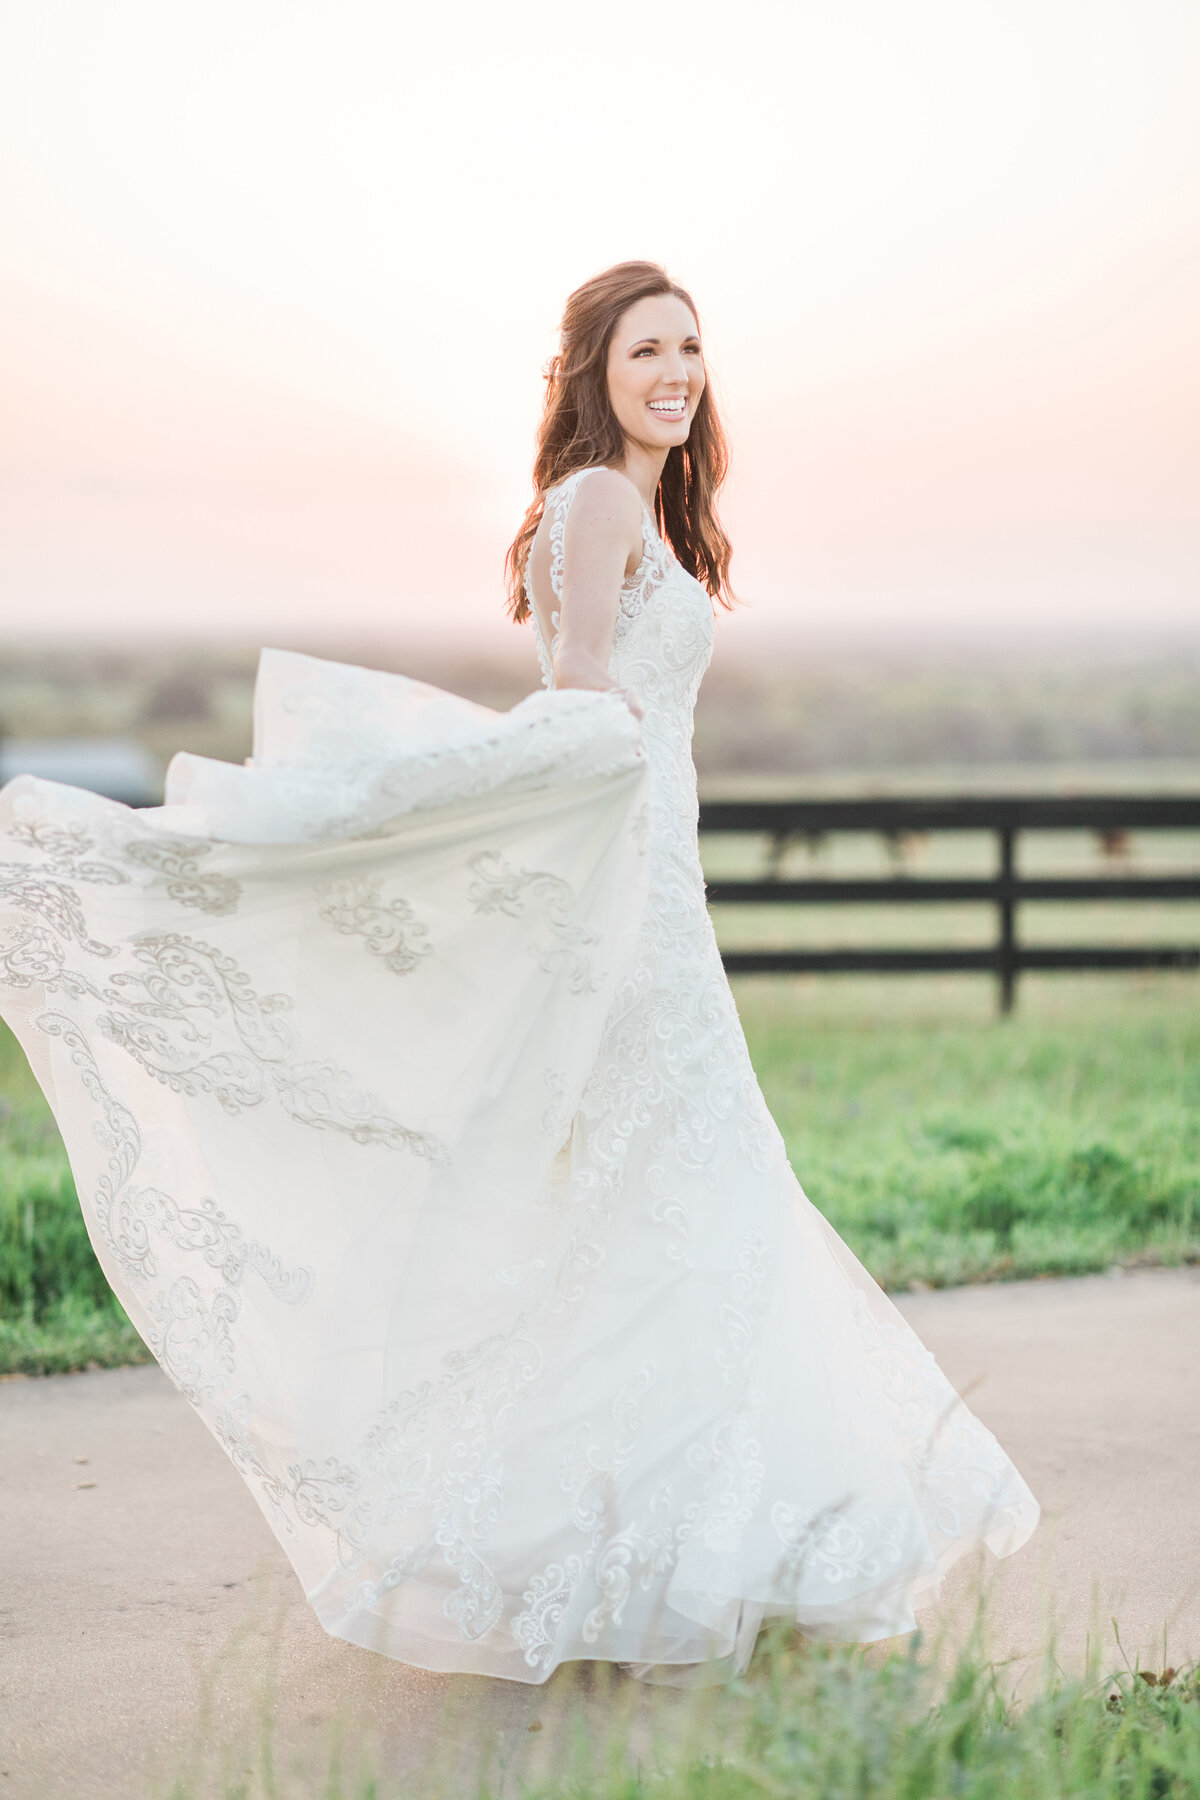 A Houston bride dancing outdoors